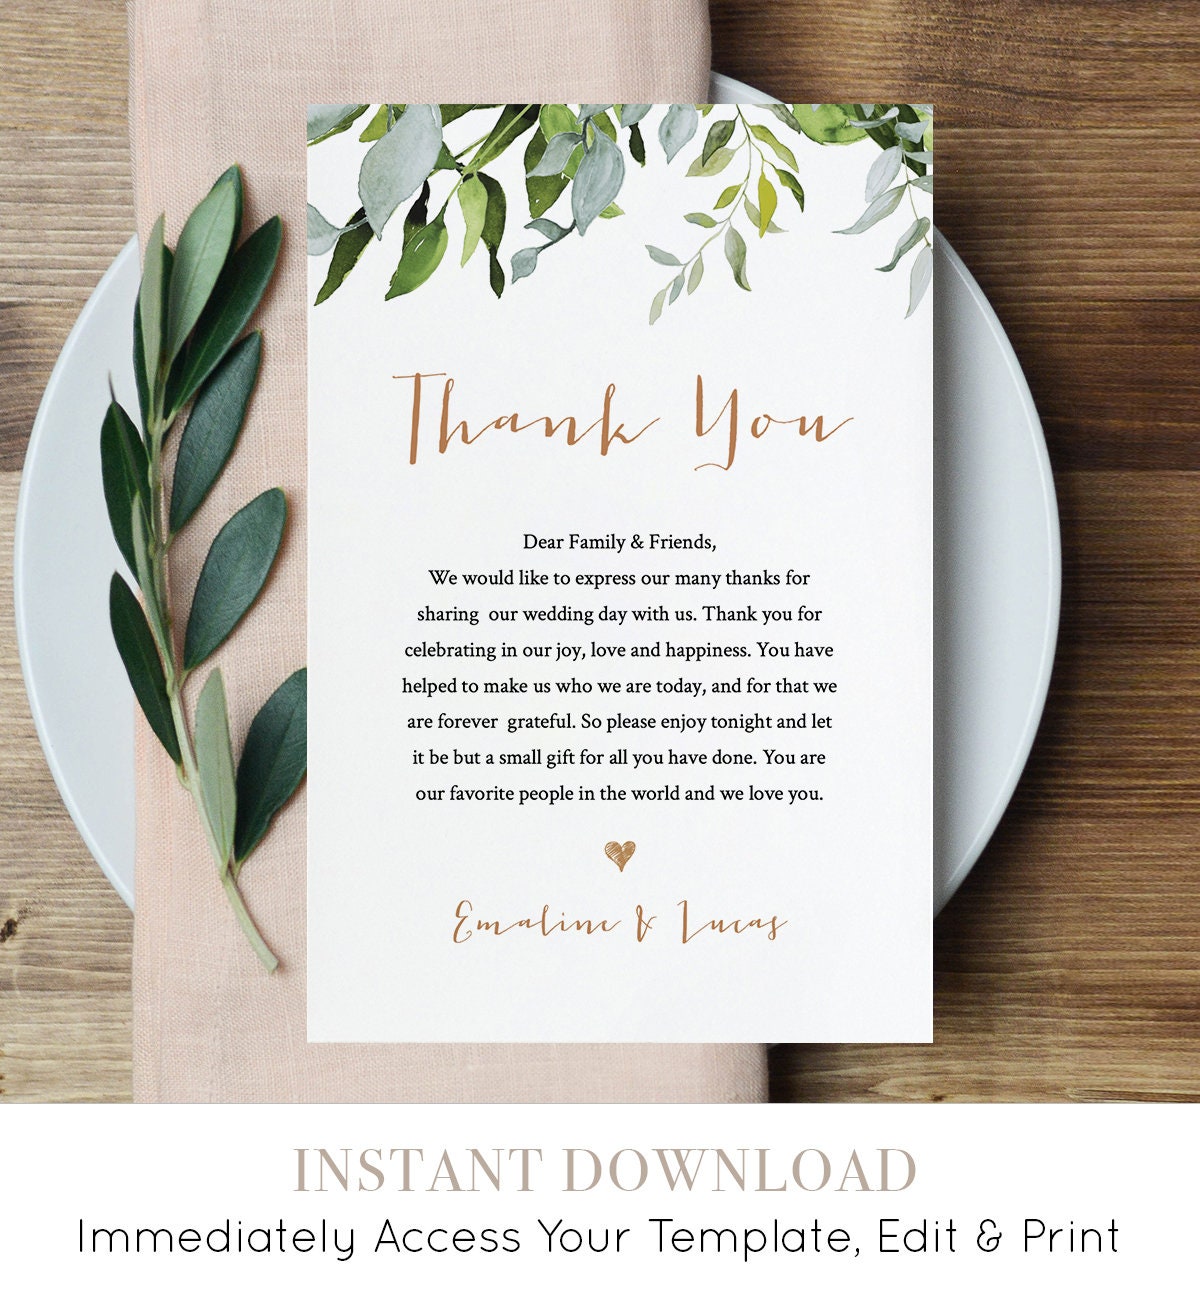 thank-you-letter-template-wedding-reception-thank-you-note-instant-download-printable-in-lieu